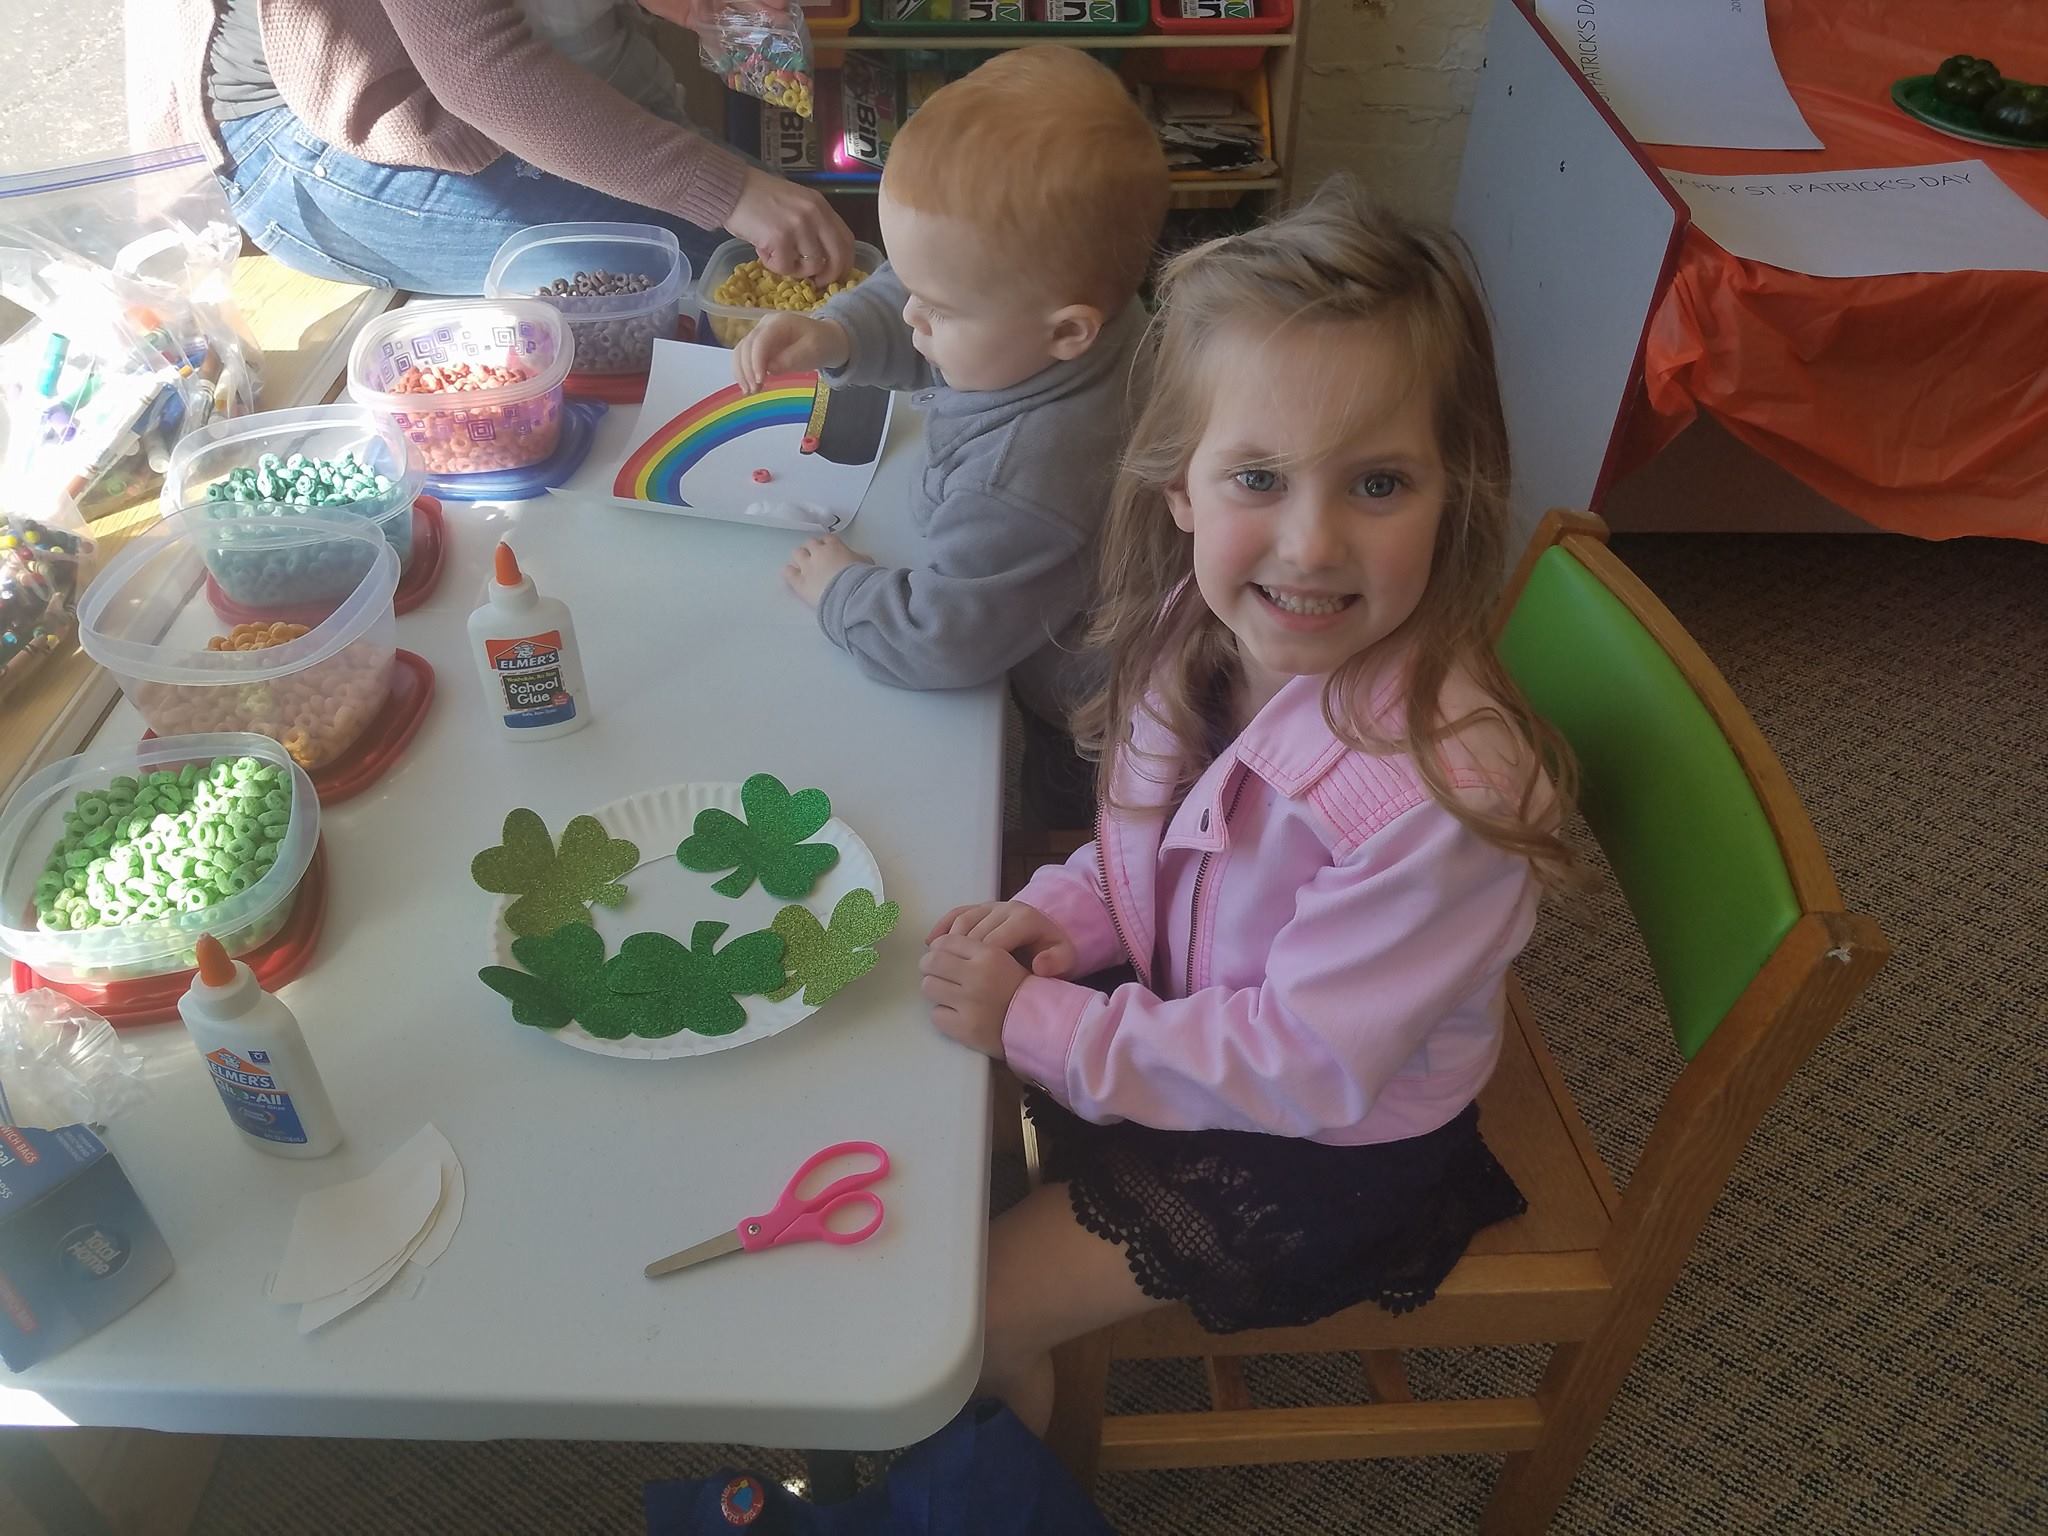 Story Time crafts - clovers!